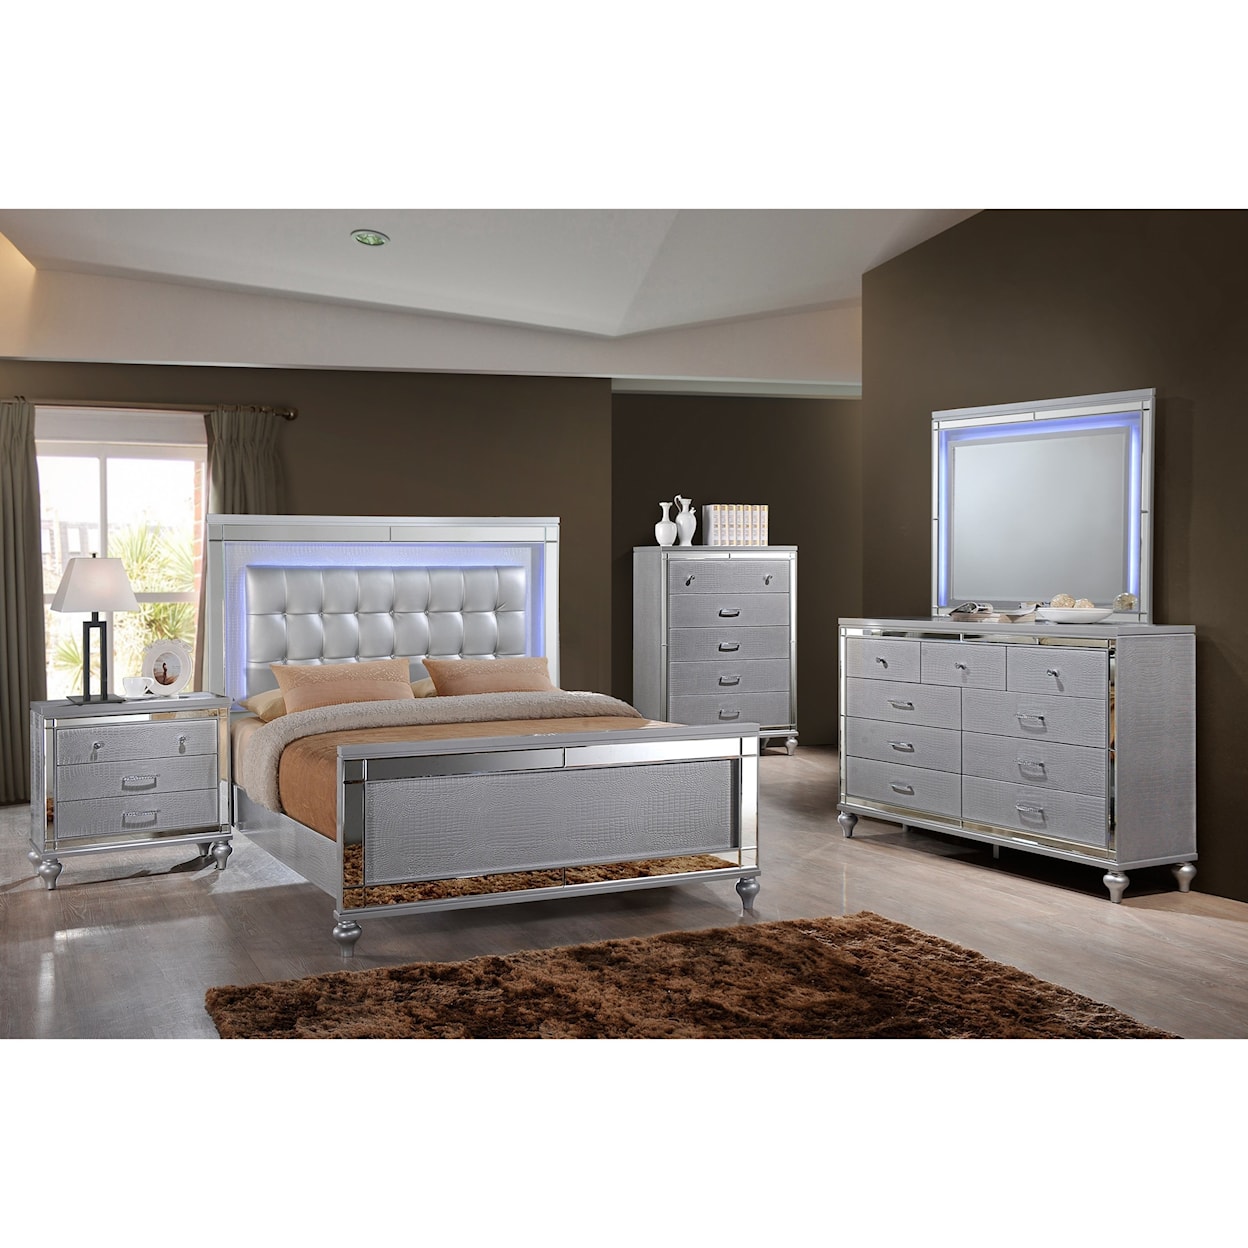 New Classic Valentino Cal King Bedroom Group